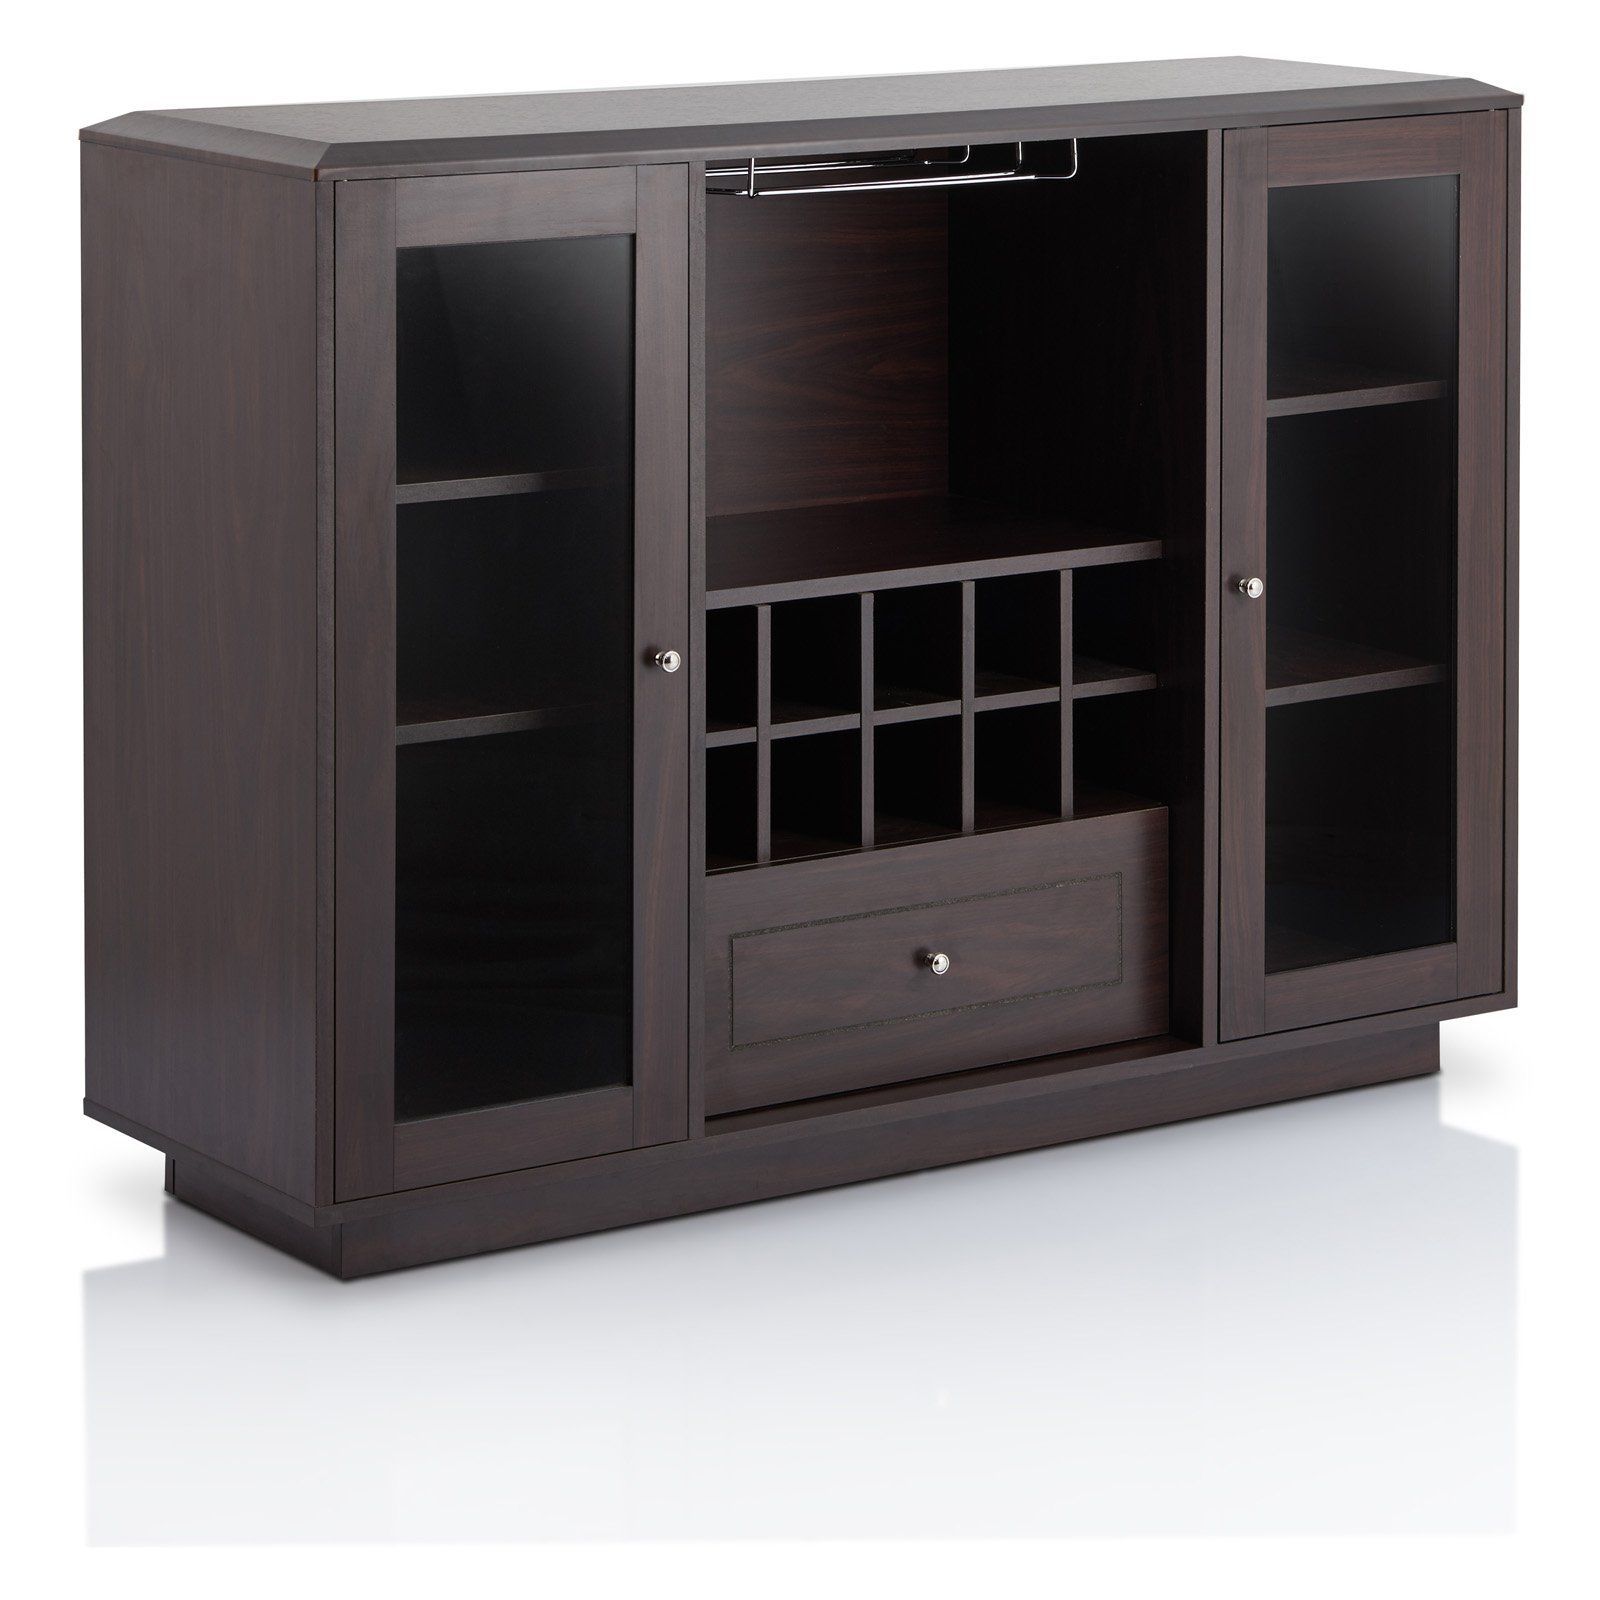 Furniture Of America Kenna Espresso Contemporary Multi Intended For Contemporary Multi Storage Dining Buffets (View 1 of 30)